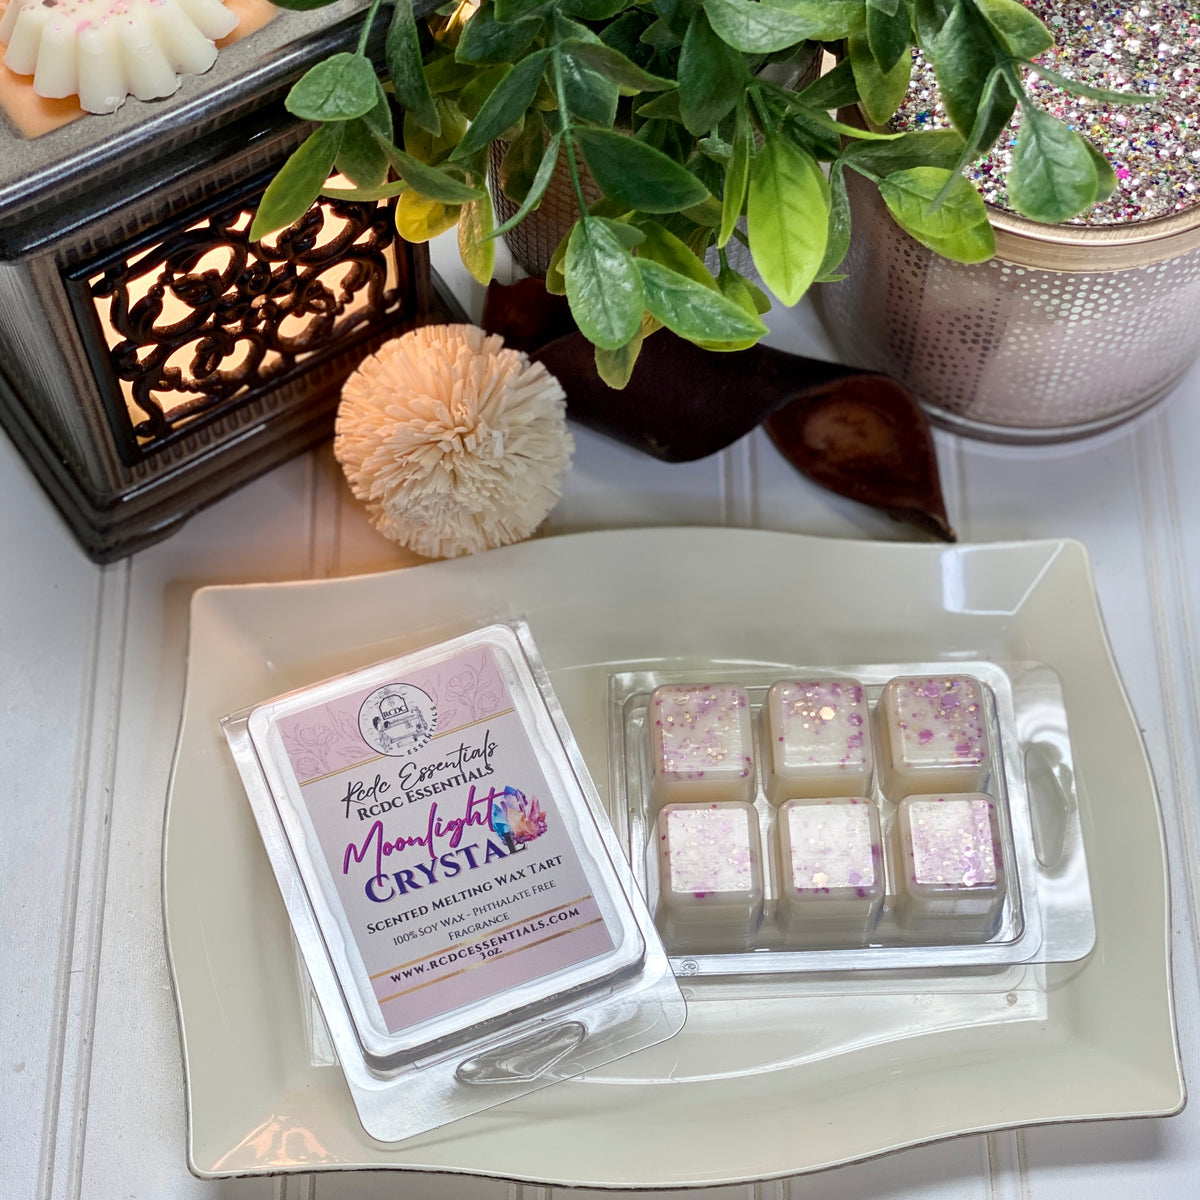 Cardamom scented wax melts, 6 wax melt cubes for home fragrance